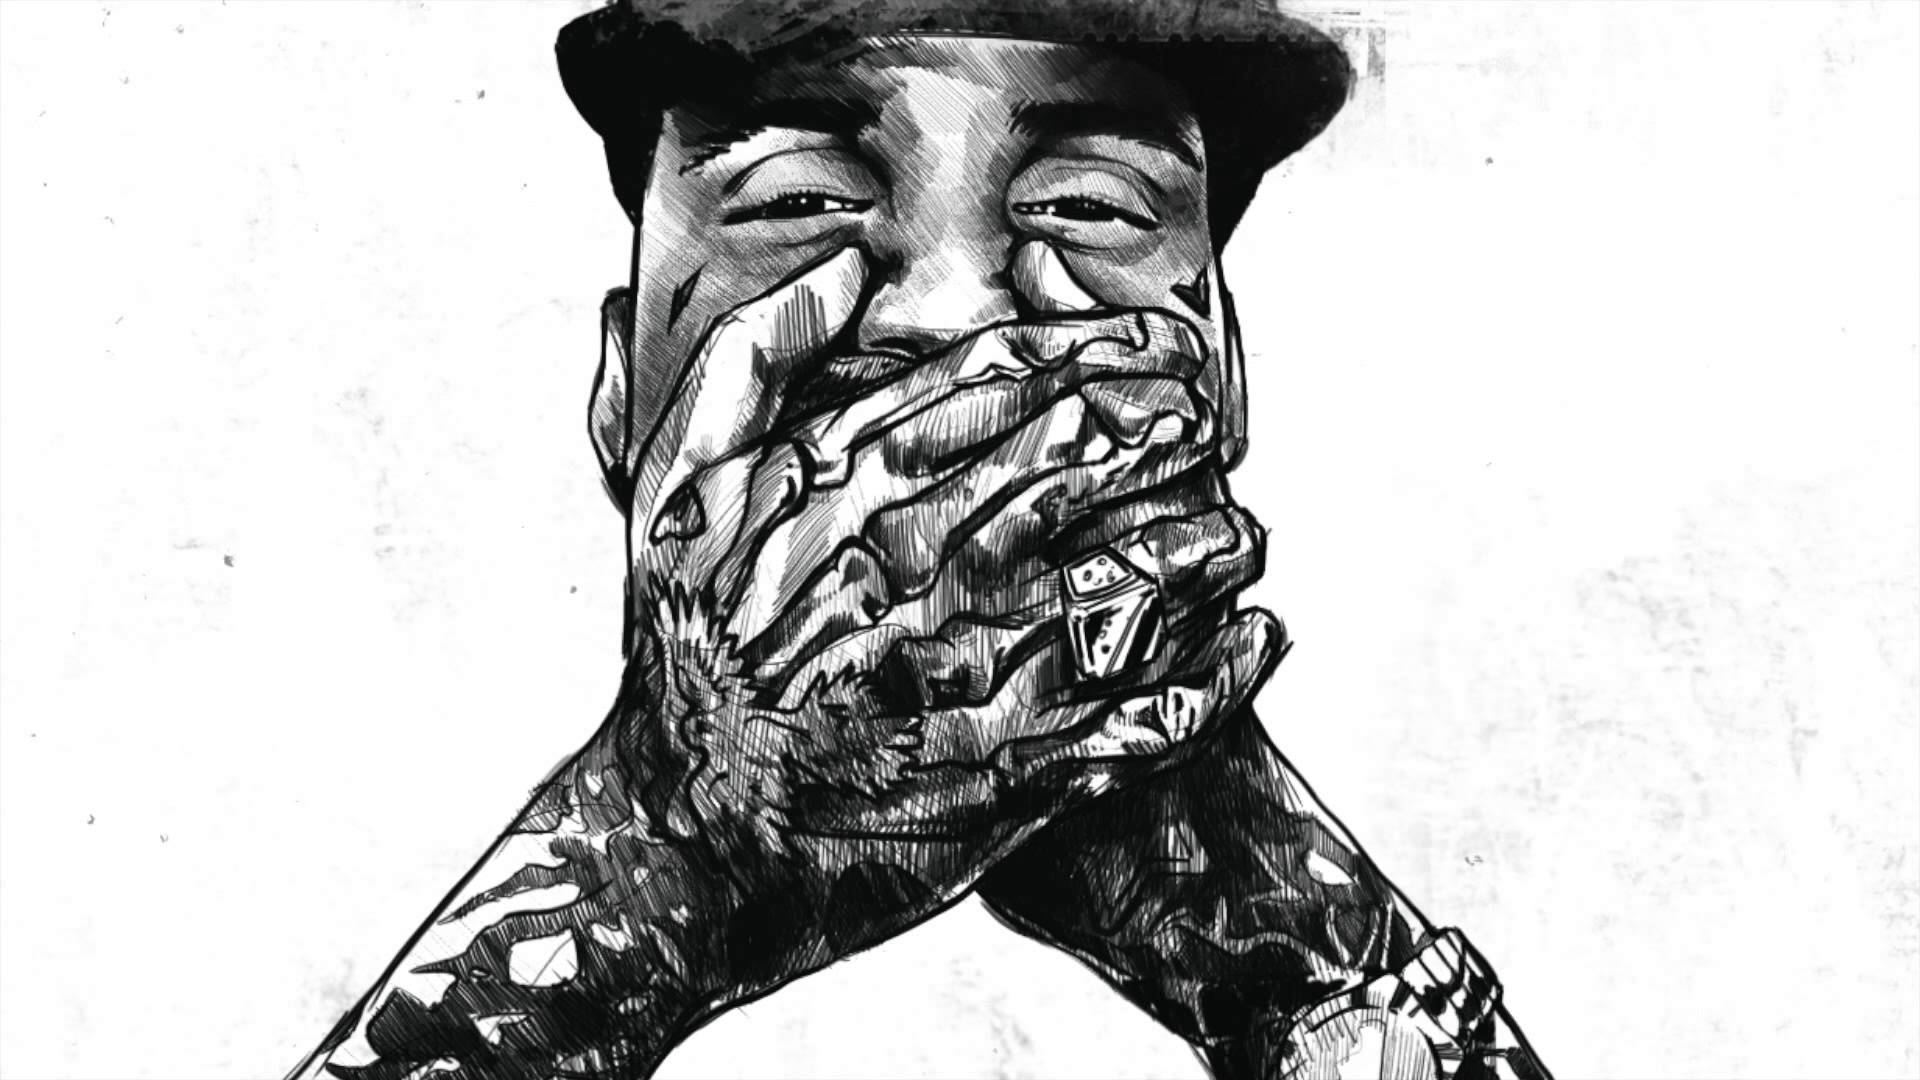 Kid Ink Wallpaper, HD Image Kid Ink Collection, NMgnCP.com